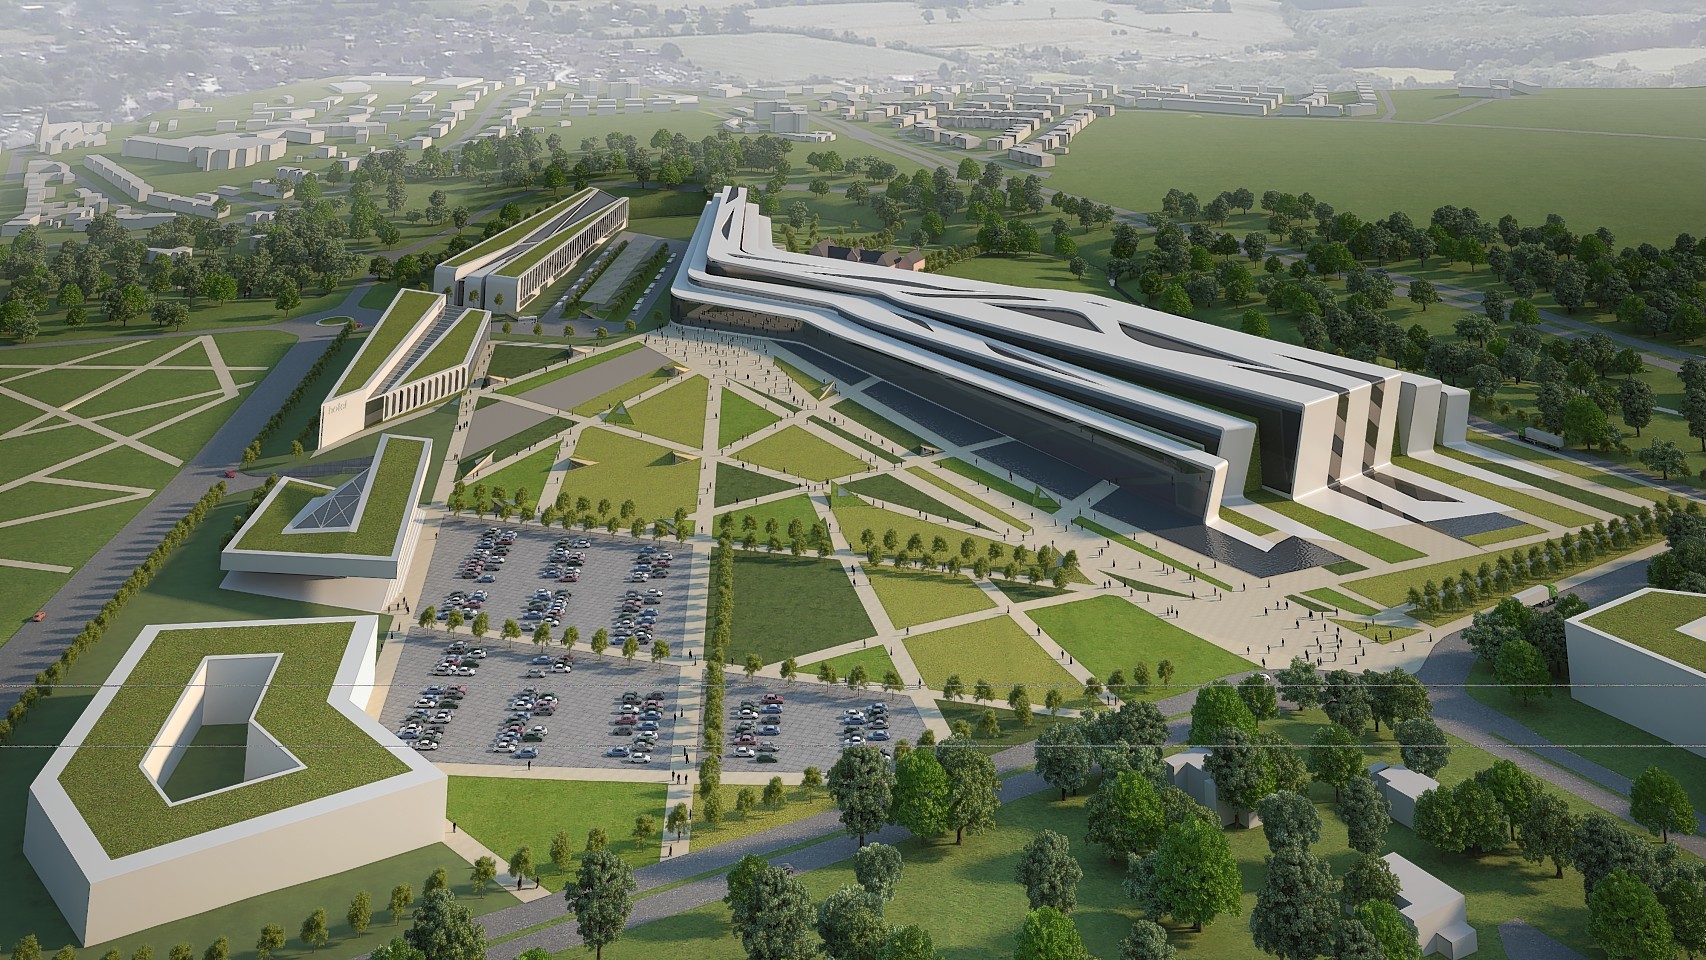 Artist's impression of the new AECC at dyce